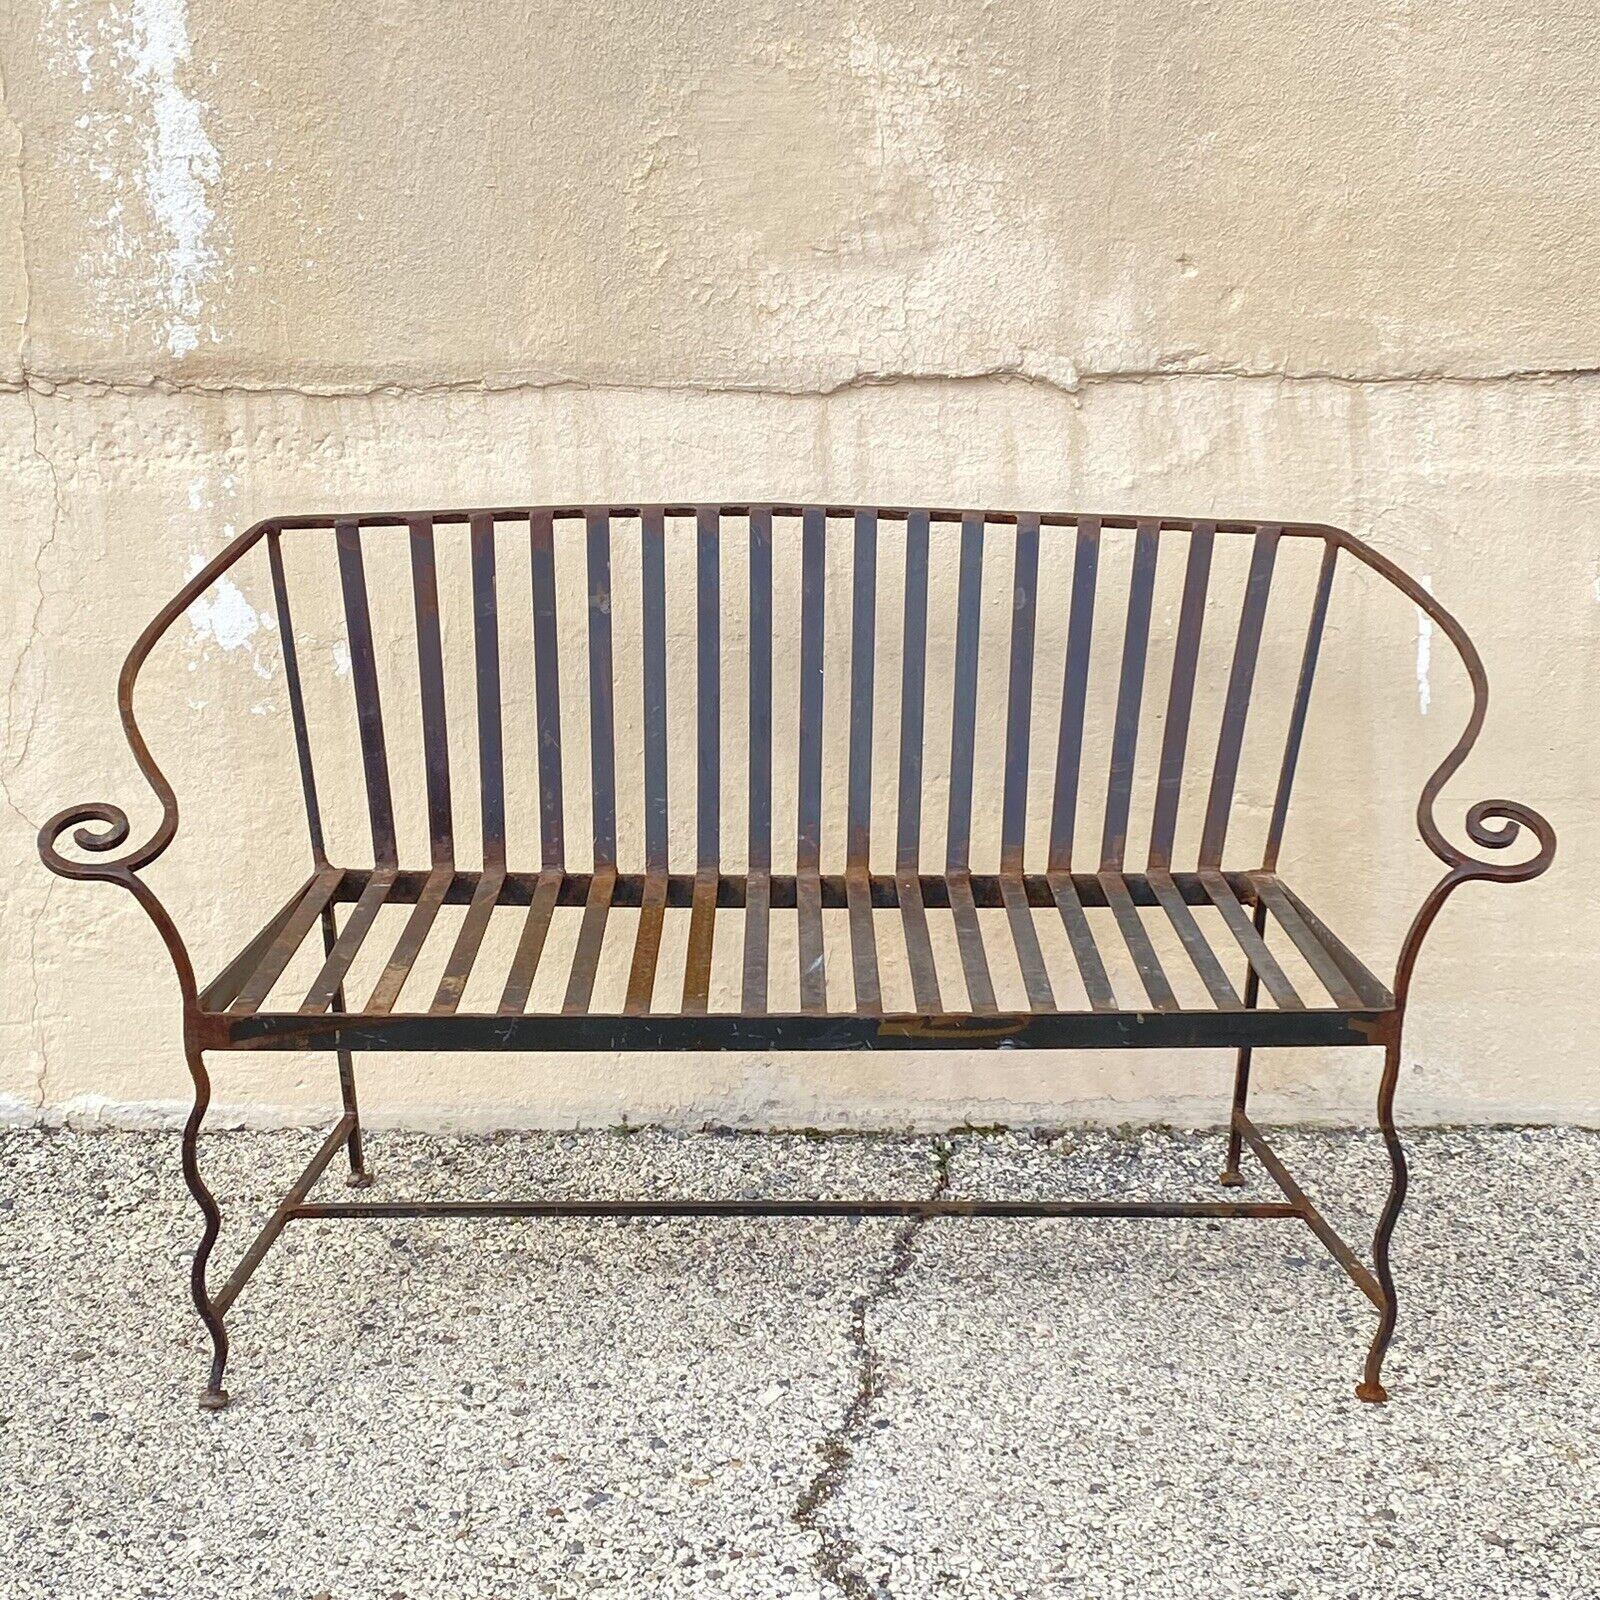 Vintage Hollywood Regency Wrought Iron Scrolling Garden Patio Loveseat Bench. Circa Late 20th Century. Measurements: 31